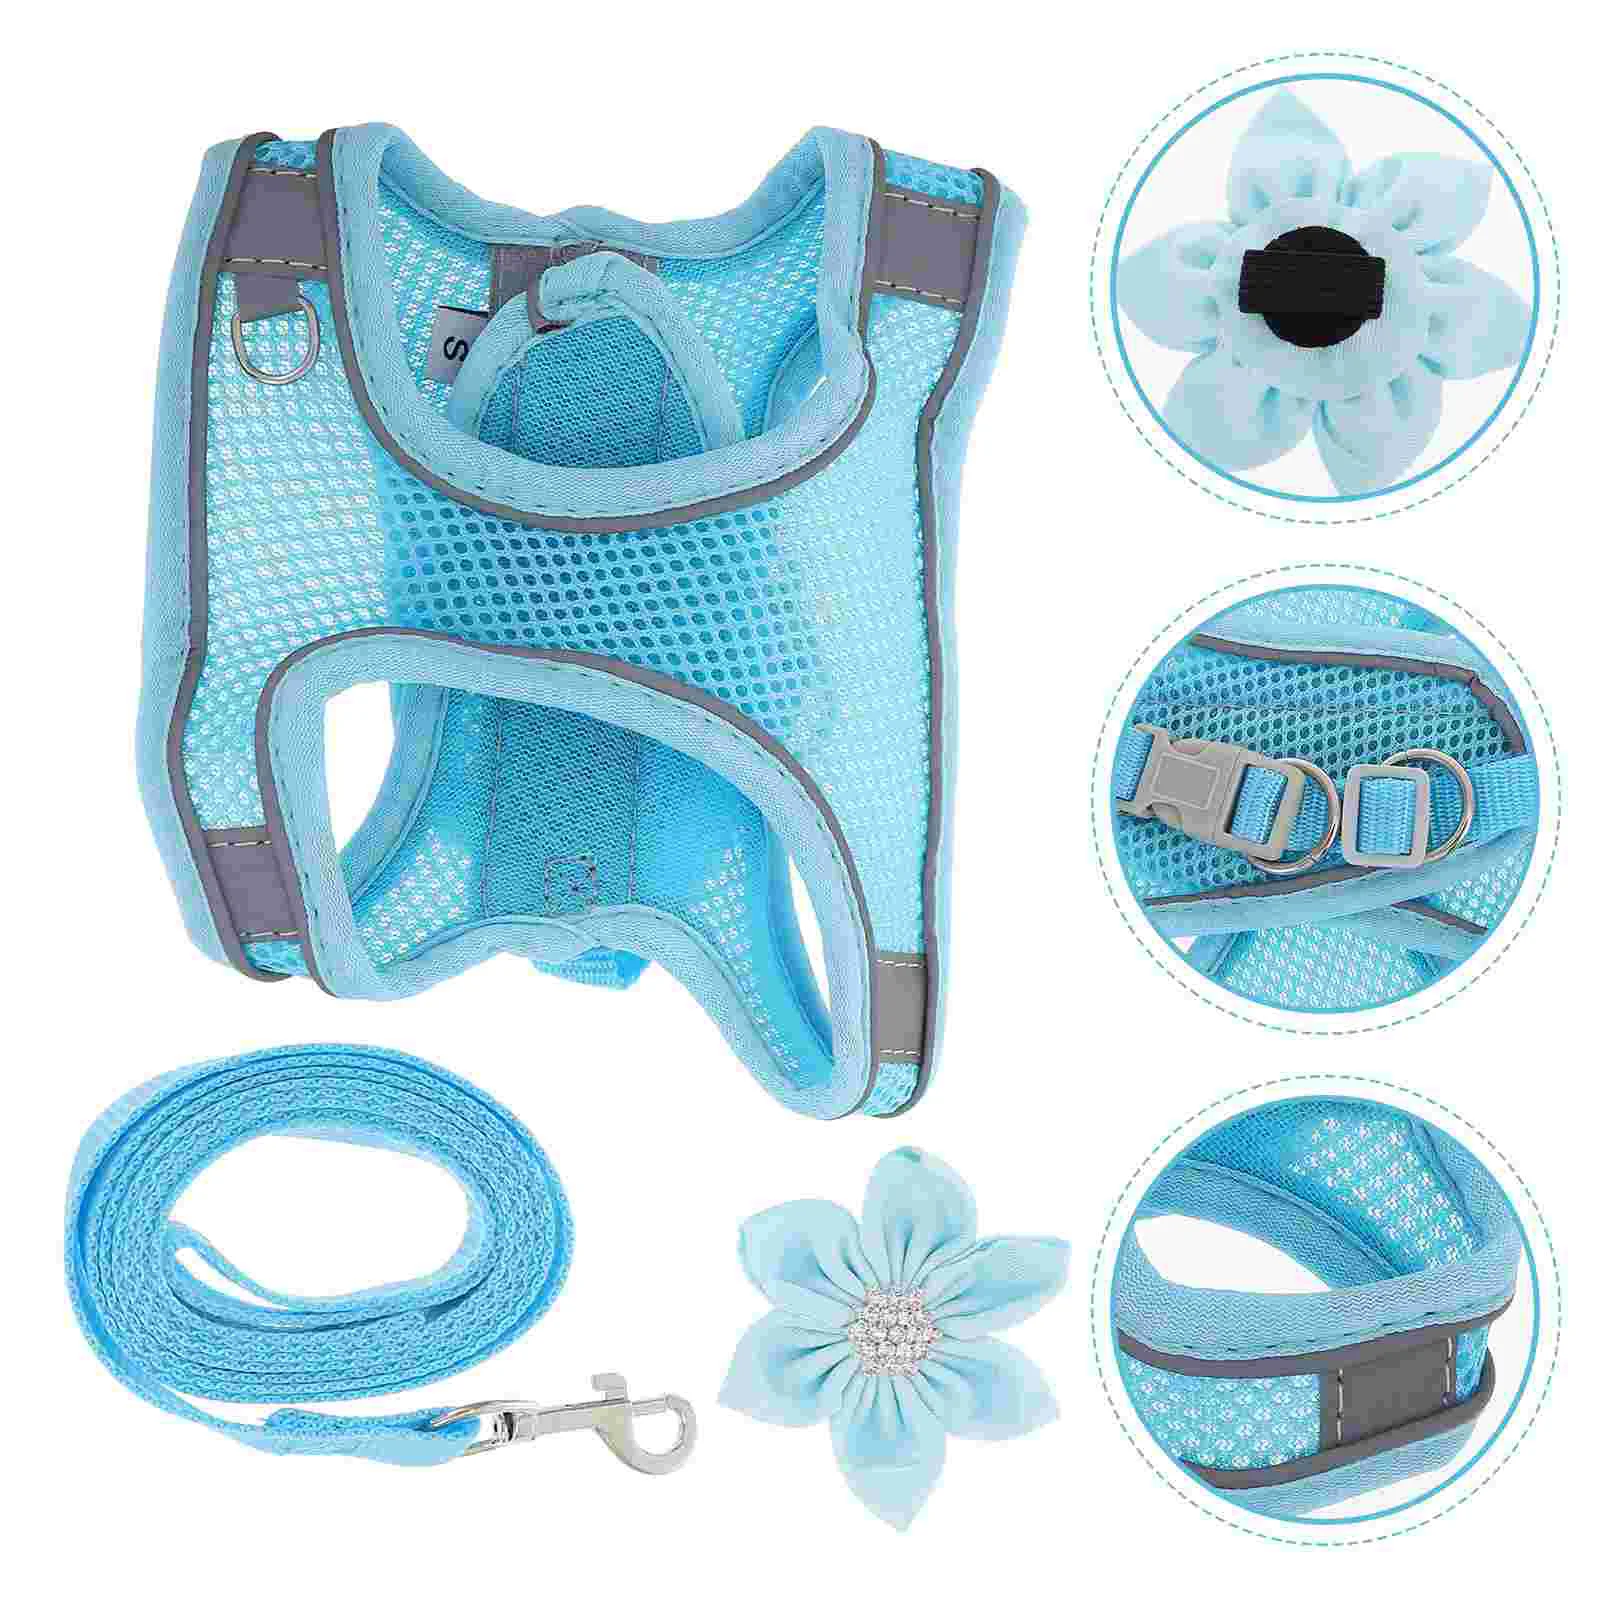 

Harness Dog Leash Cat Vest Pet Walking Puppy Collar Reflective Safety Traction Dogs Adjustable Leashes Collars Set Proof Rope